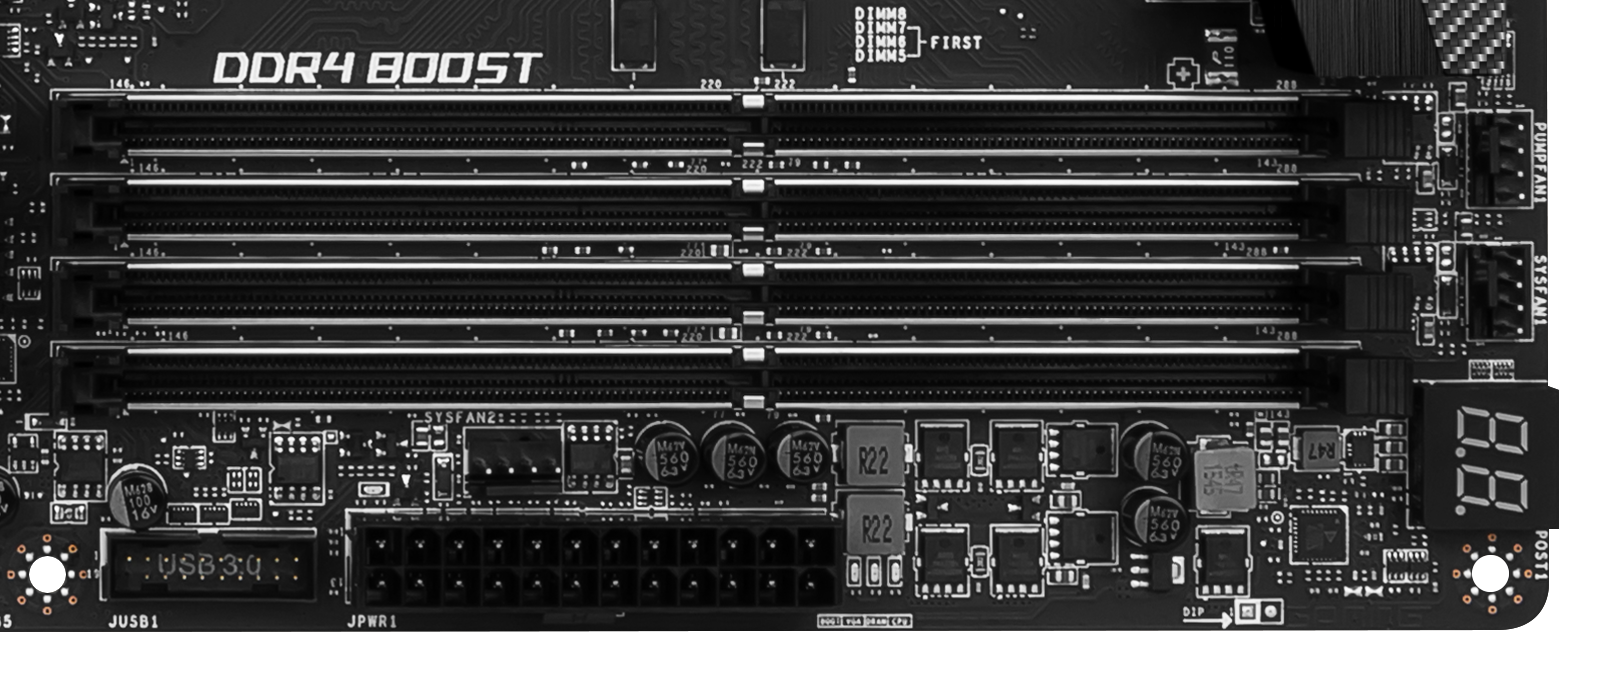 Board Features, Visual Inspection - The MSI X99A Gaming Pro Carbon